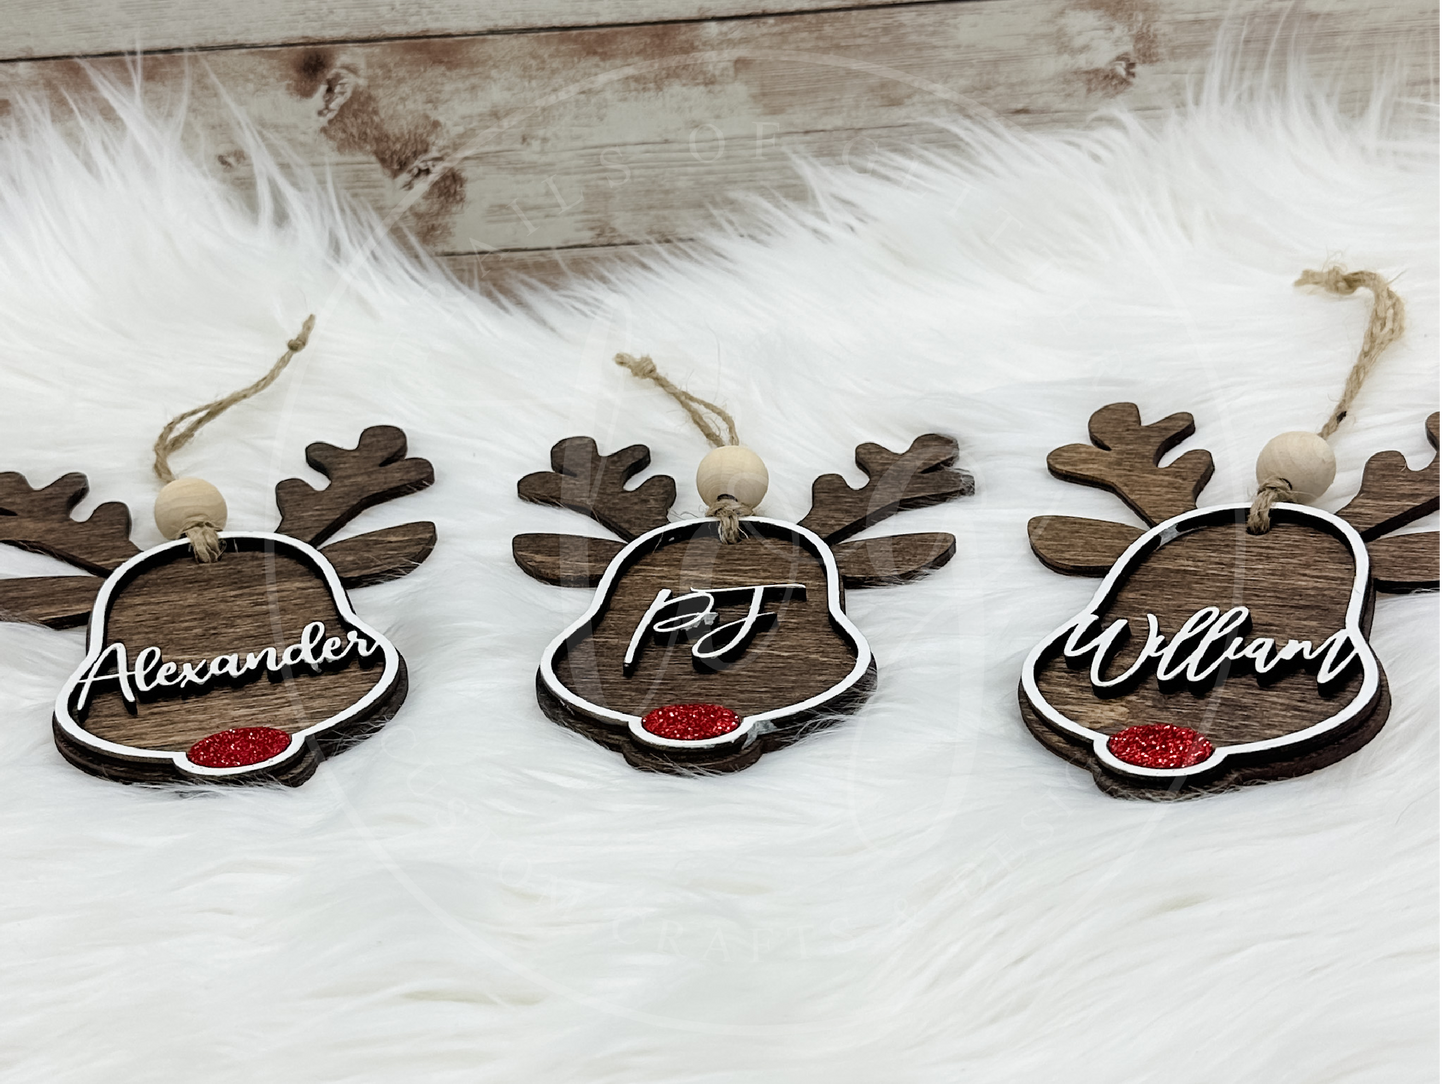 Reindeer Personalized Ornaments